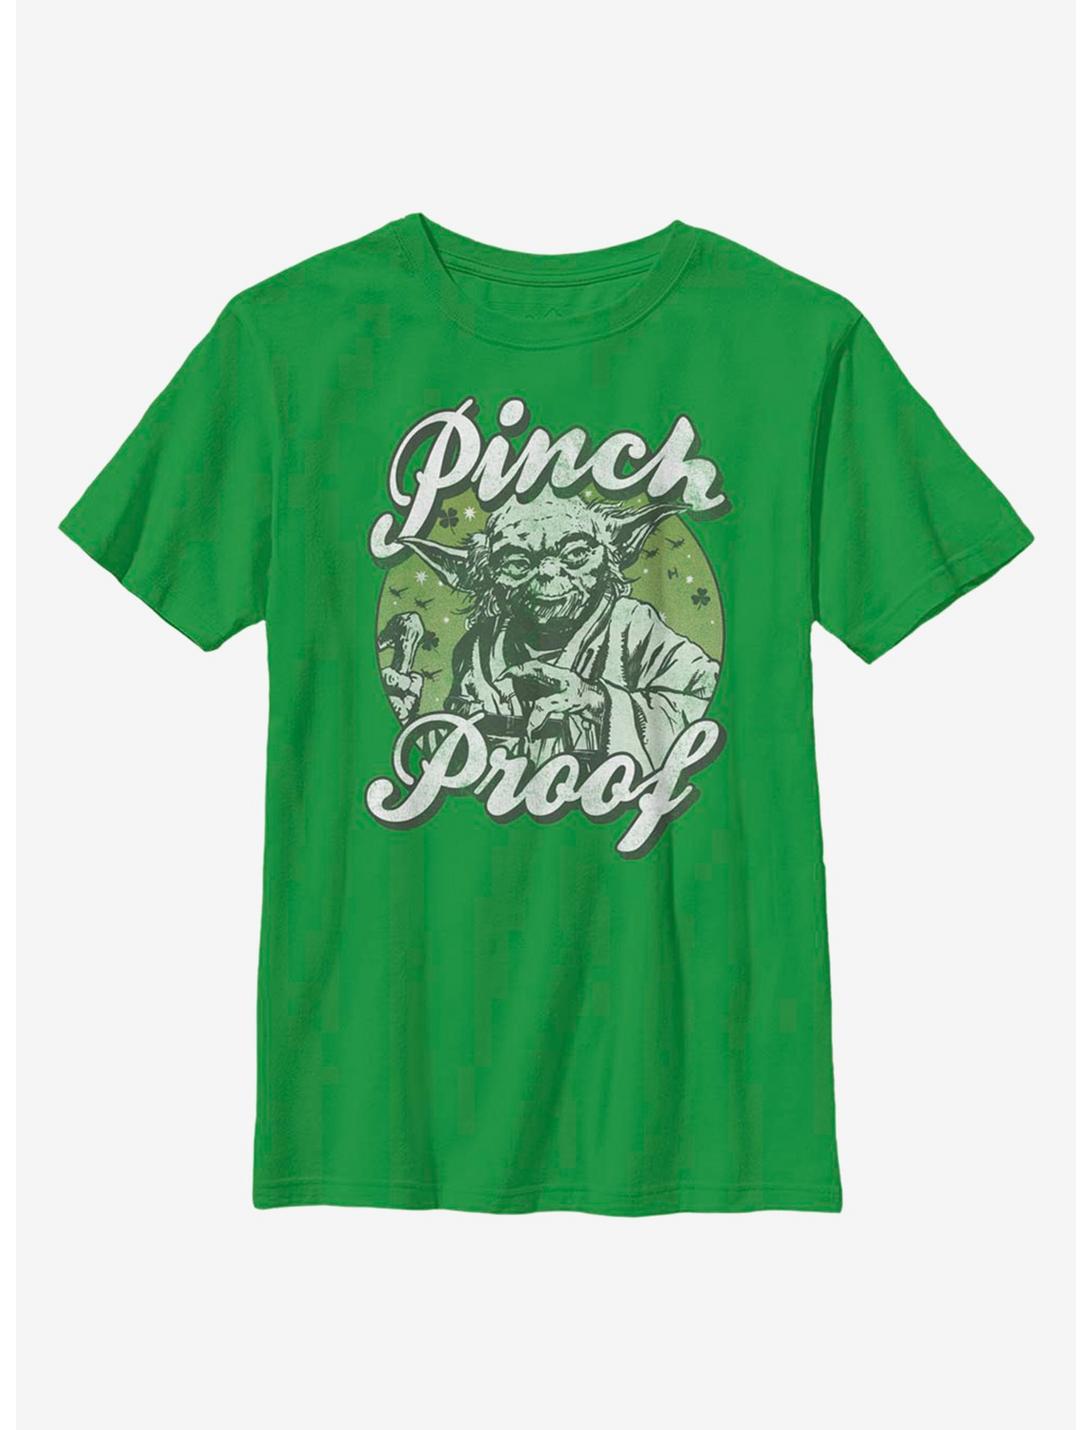 Star Wars Yoda Is Pinch Proof Youth T-Shirt, KELLY, hi-res